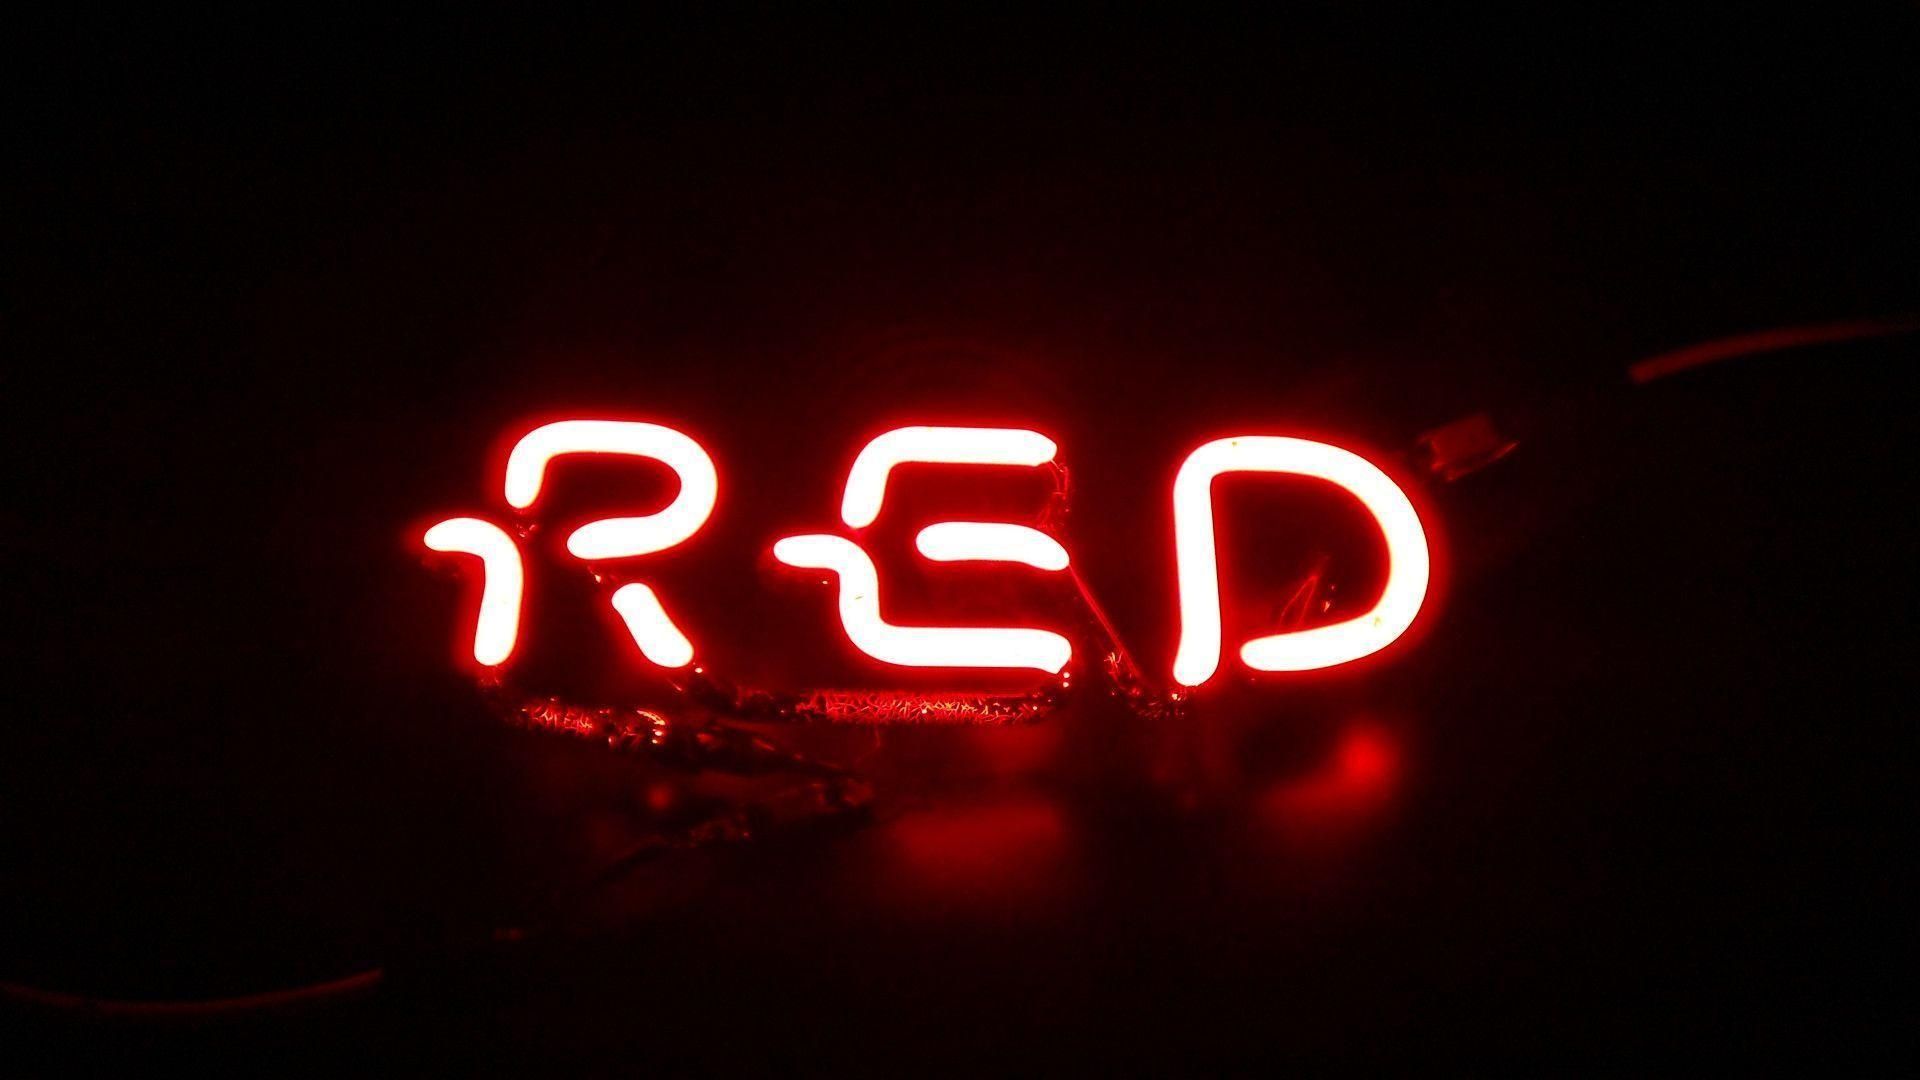 A red neon sign that is lit up - 